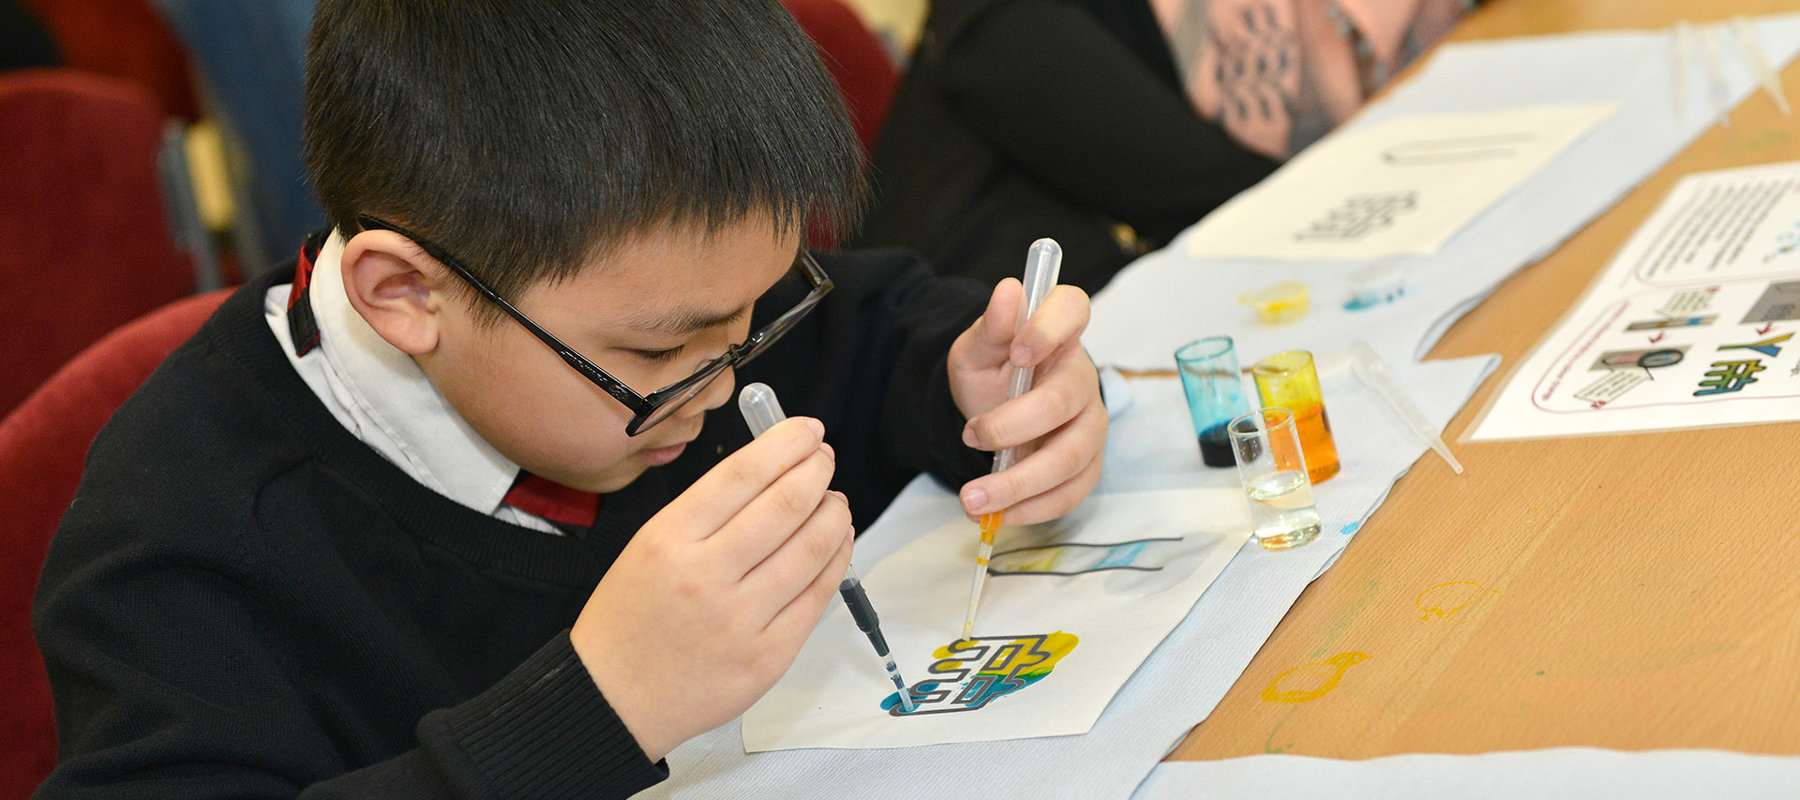 Primary school child taking part in lab on a chip activity